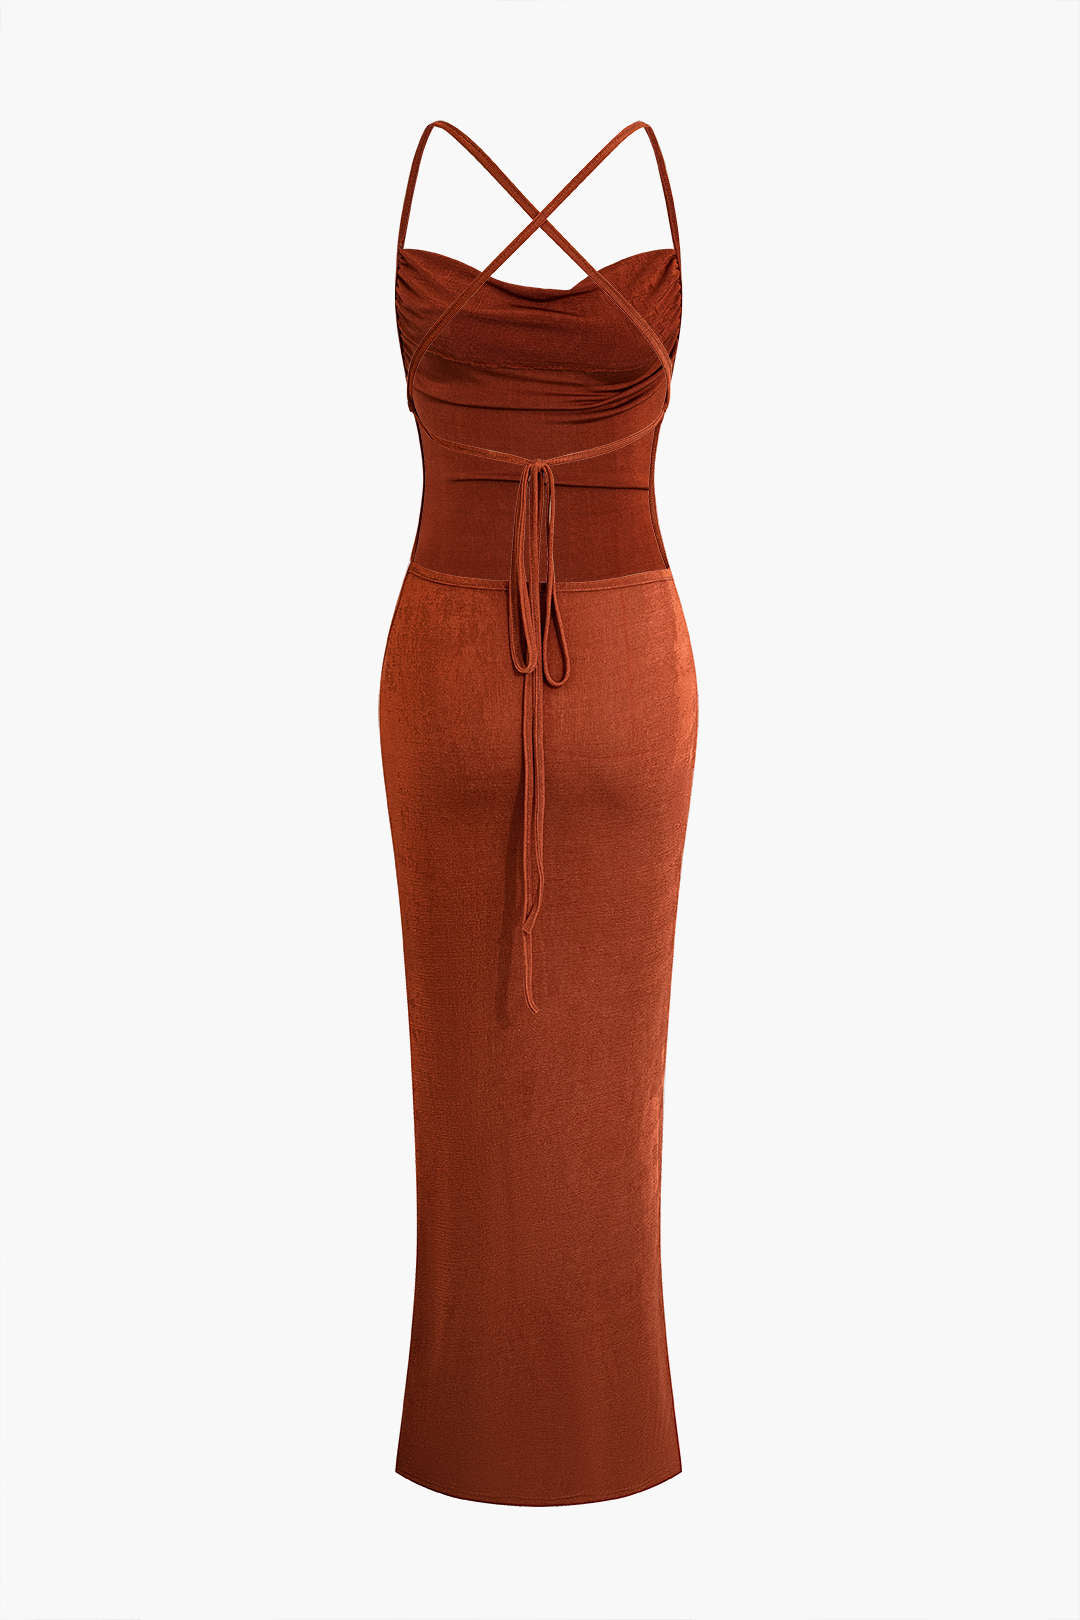 Criss Cross Ruched Backless Maxi Dress